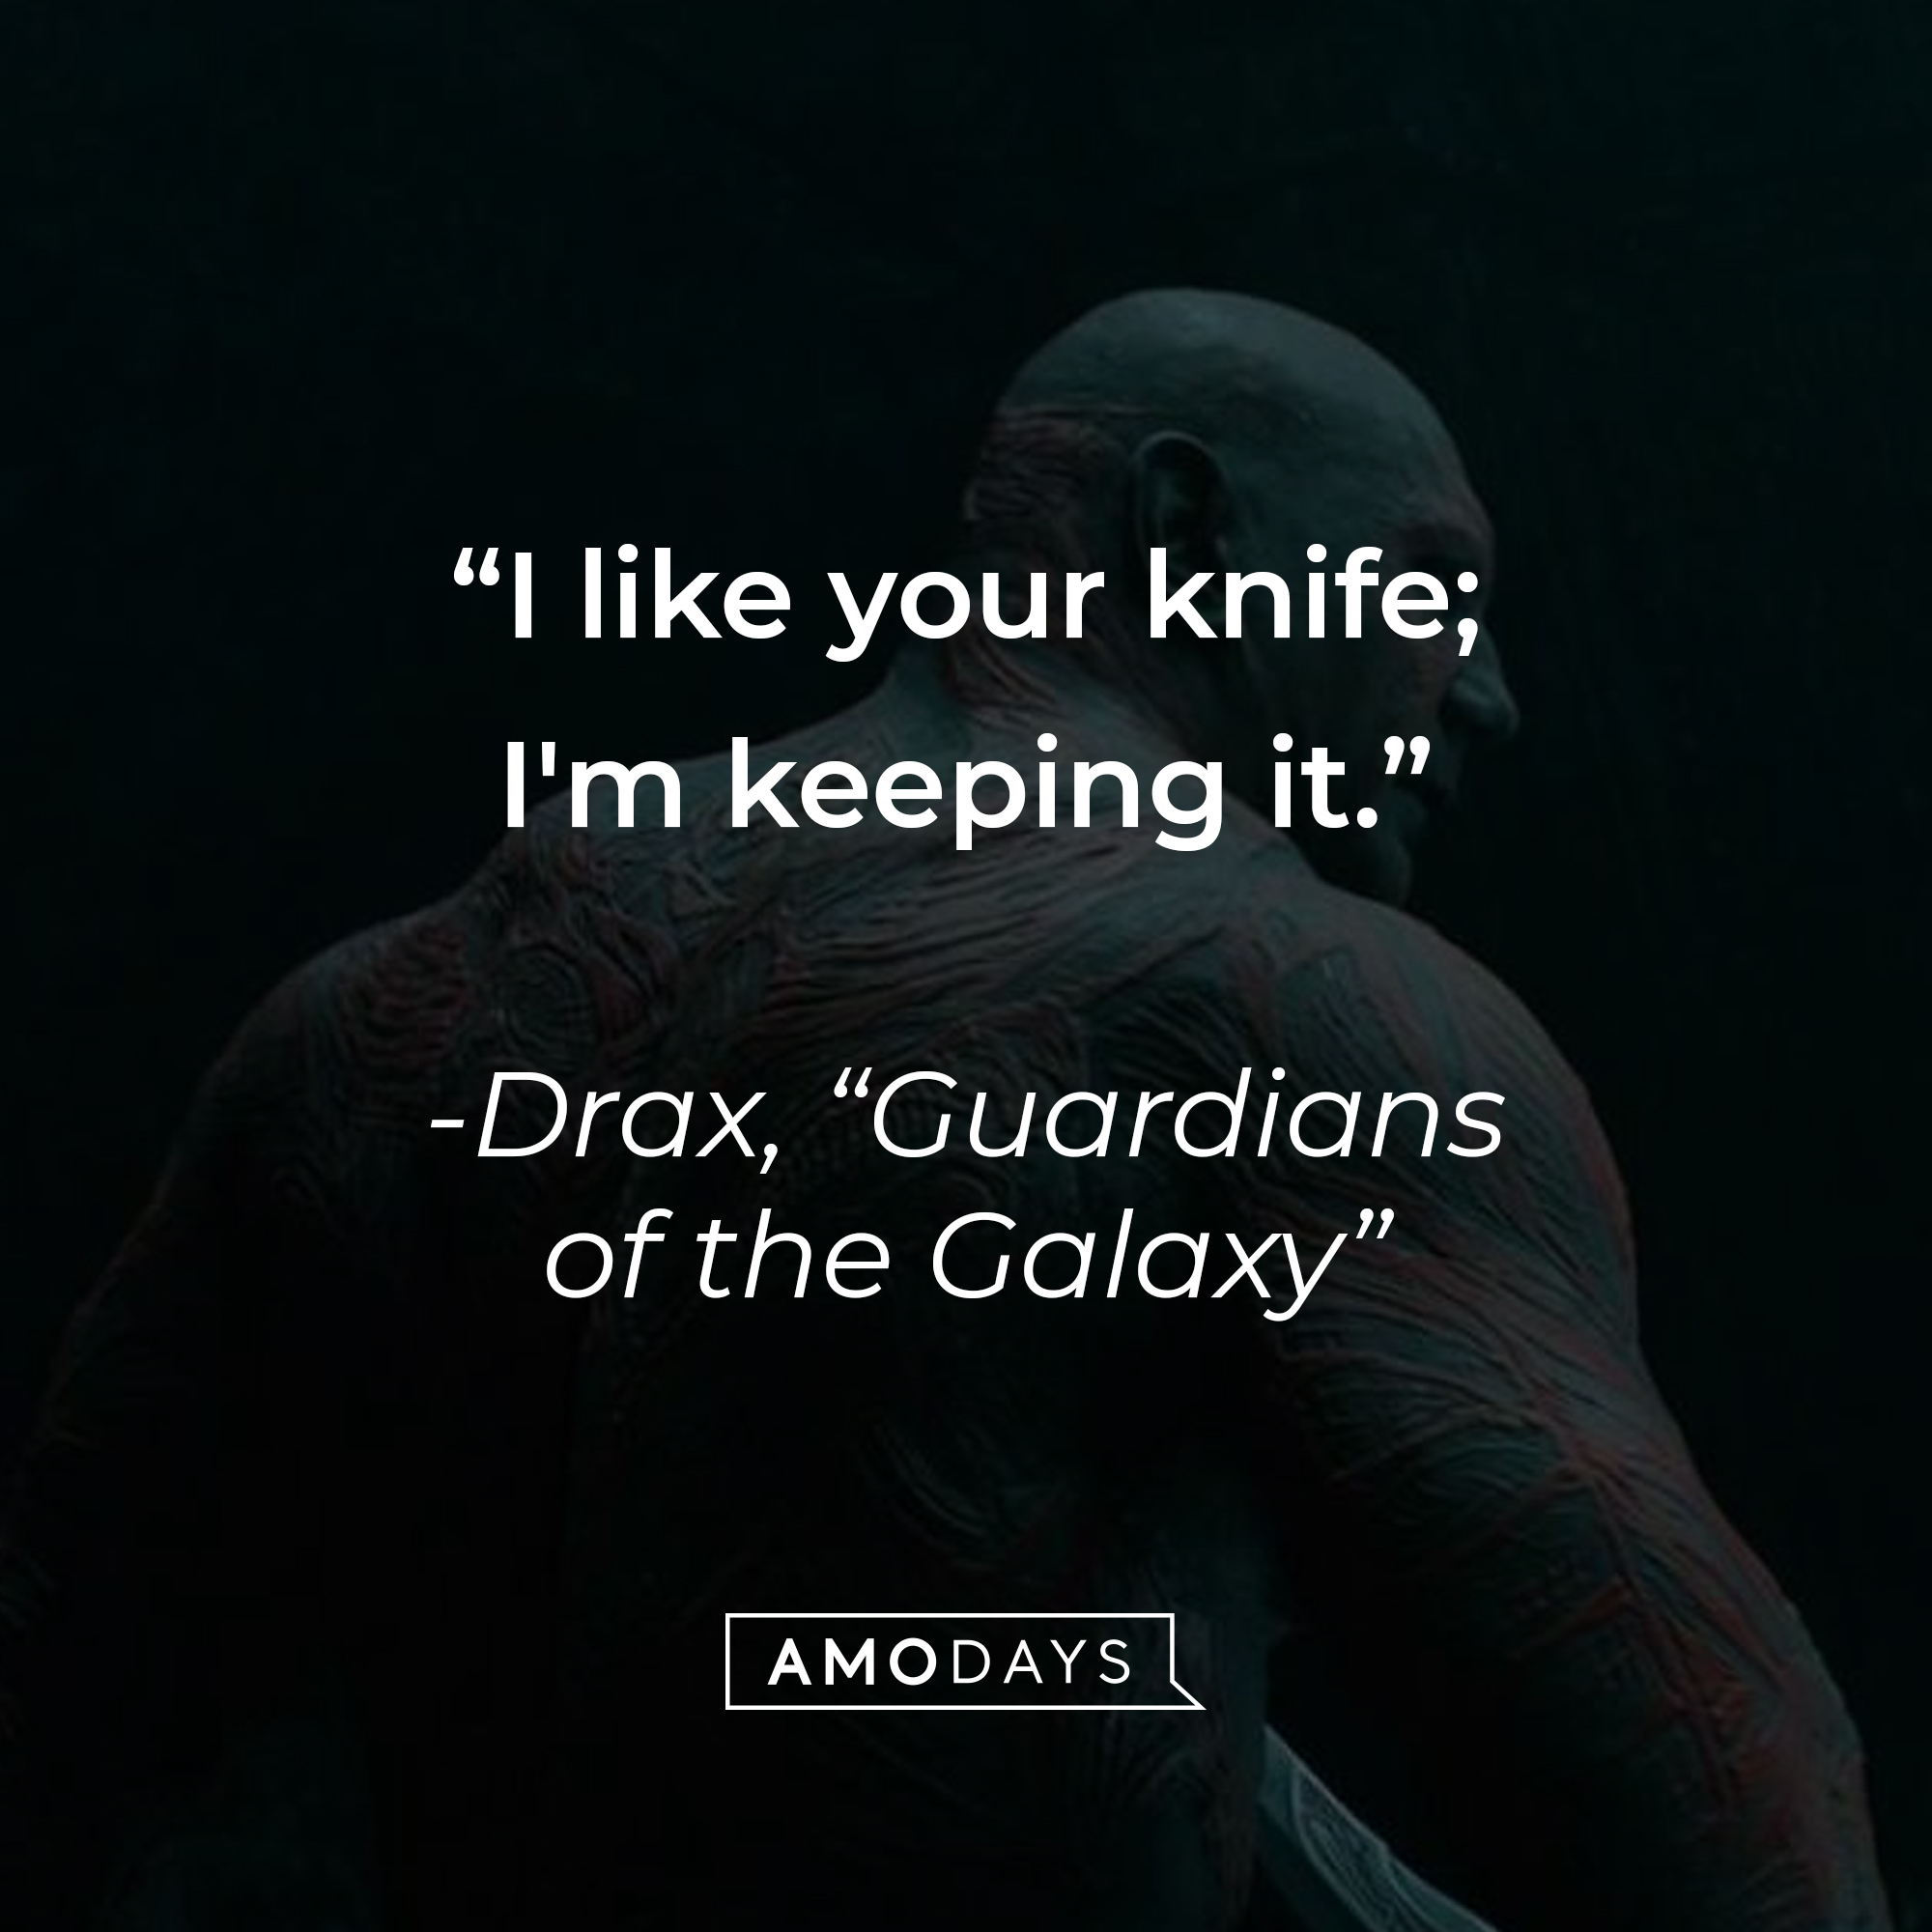 Drax with his quote: "I like your knife; I'm keeping it." | Source: Facebook.com/guardiansofthegalaxy